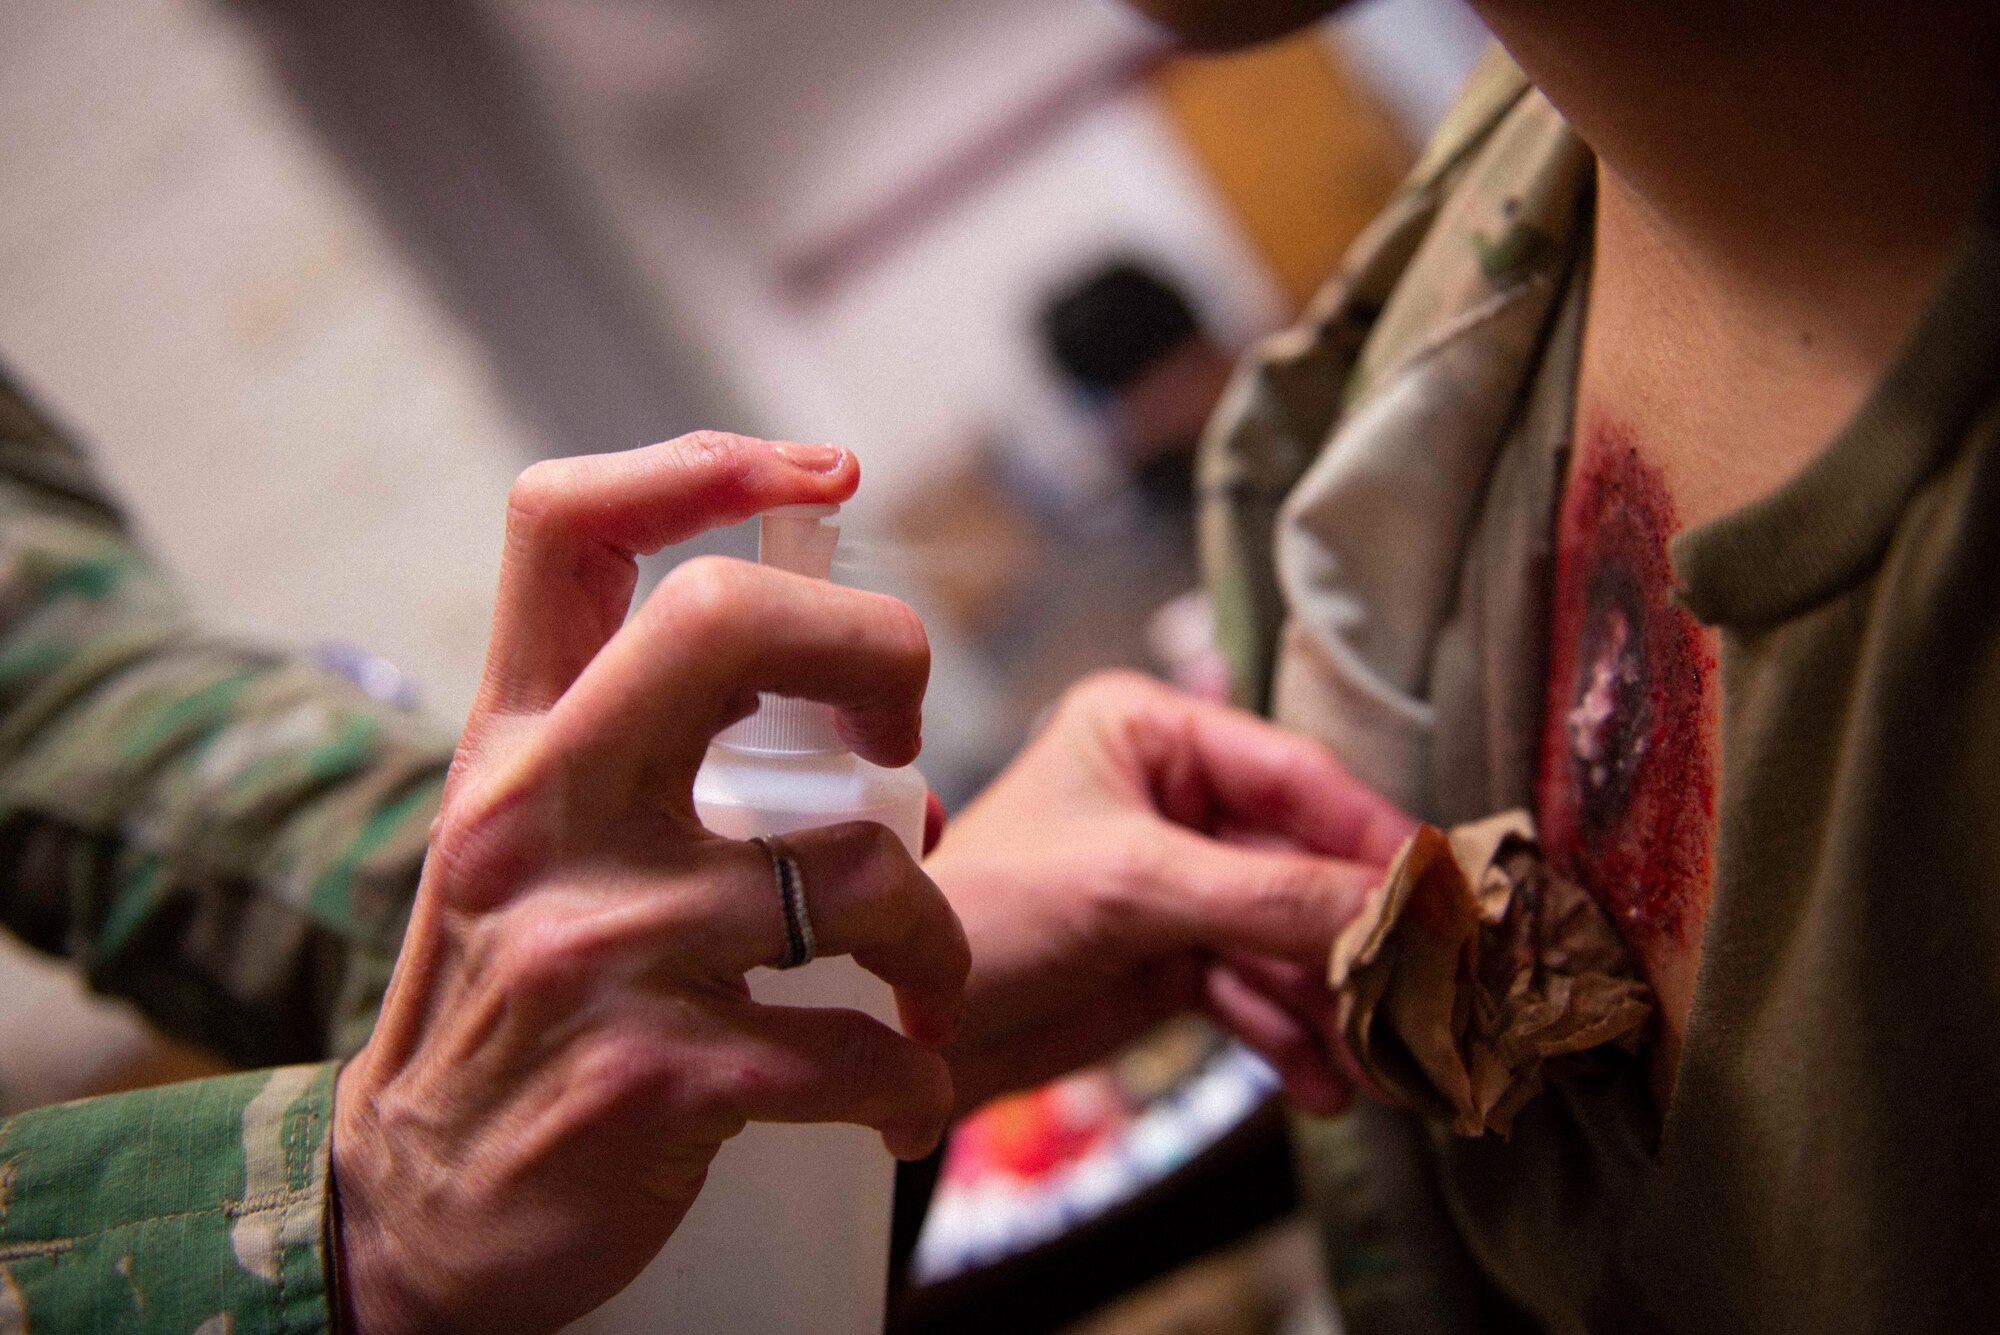 Maj. Deanna Jensen, a clinical nurse with the 934th Aeromedical Staging Squadron, sprays water on a crushed Alka-Seltzer tablet sprinkled on an imitation sucking chest wound on April 7, 2022, at Volk Field Air National Guard Base, Wis. The mixture of the water and crushed tablet produces red bubbles to simulate blood loss during a mass casualty training exercise supporting Viking Shield.  (U.S. Air Force photo by Chris Farley)